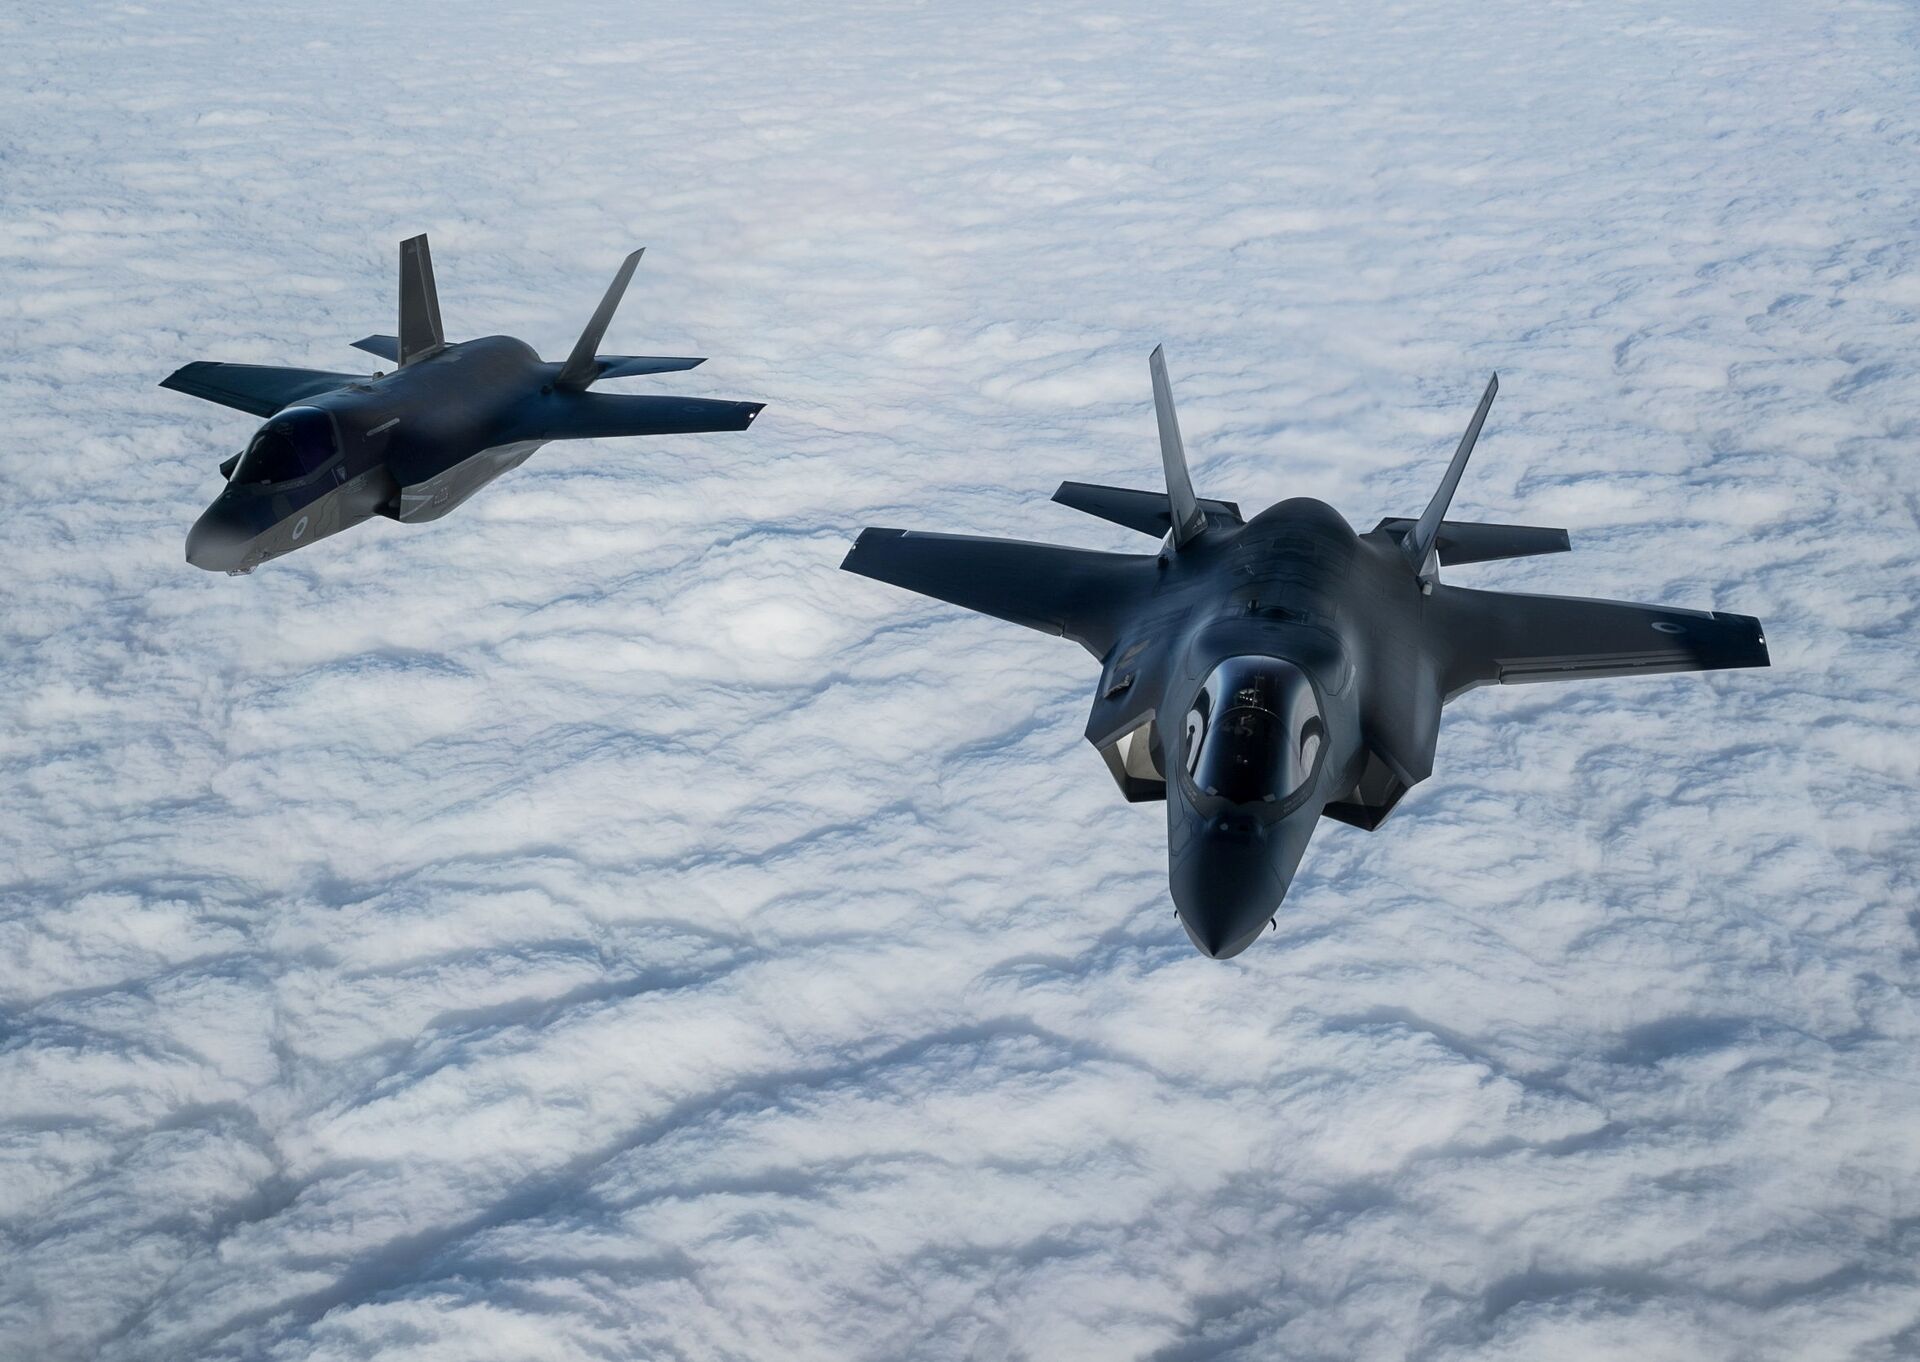 A pair of RAF F-35B Lightning fighter jets flies over The English Channel during the Point Blank exercise after taking off from RAF Mildenhall, Britain, November 27, 2018 - Sputnik International, 1920, 18.10.2021